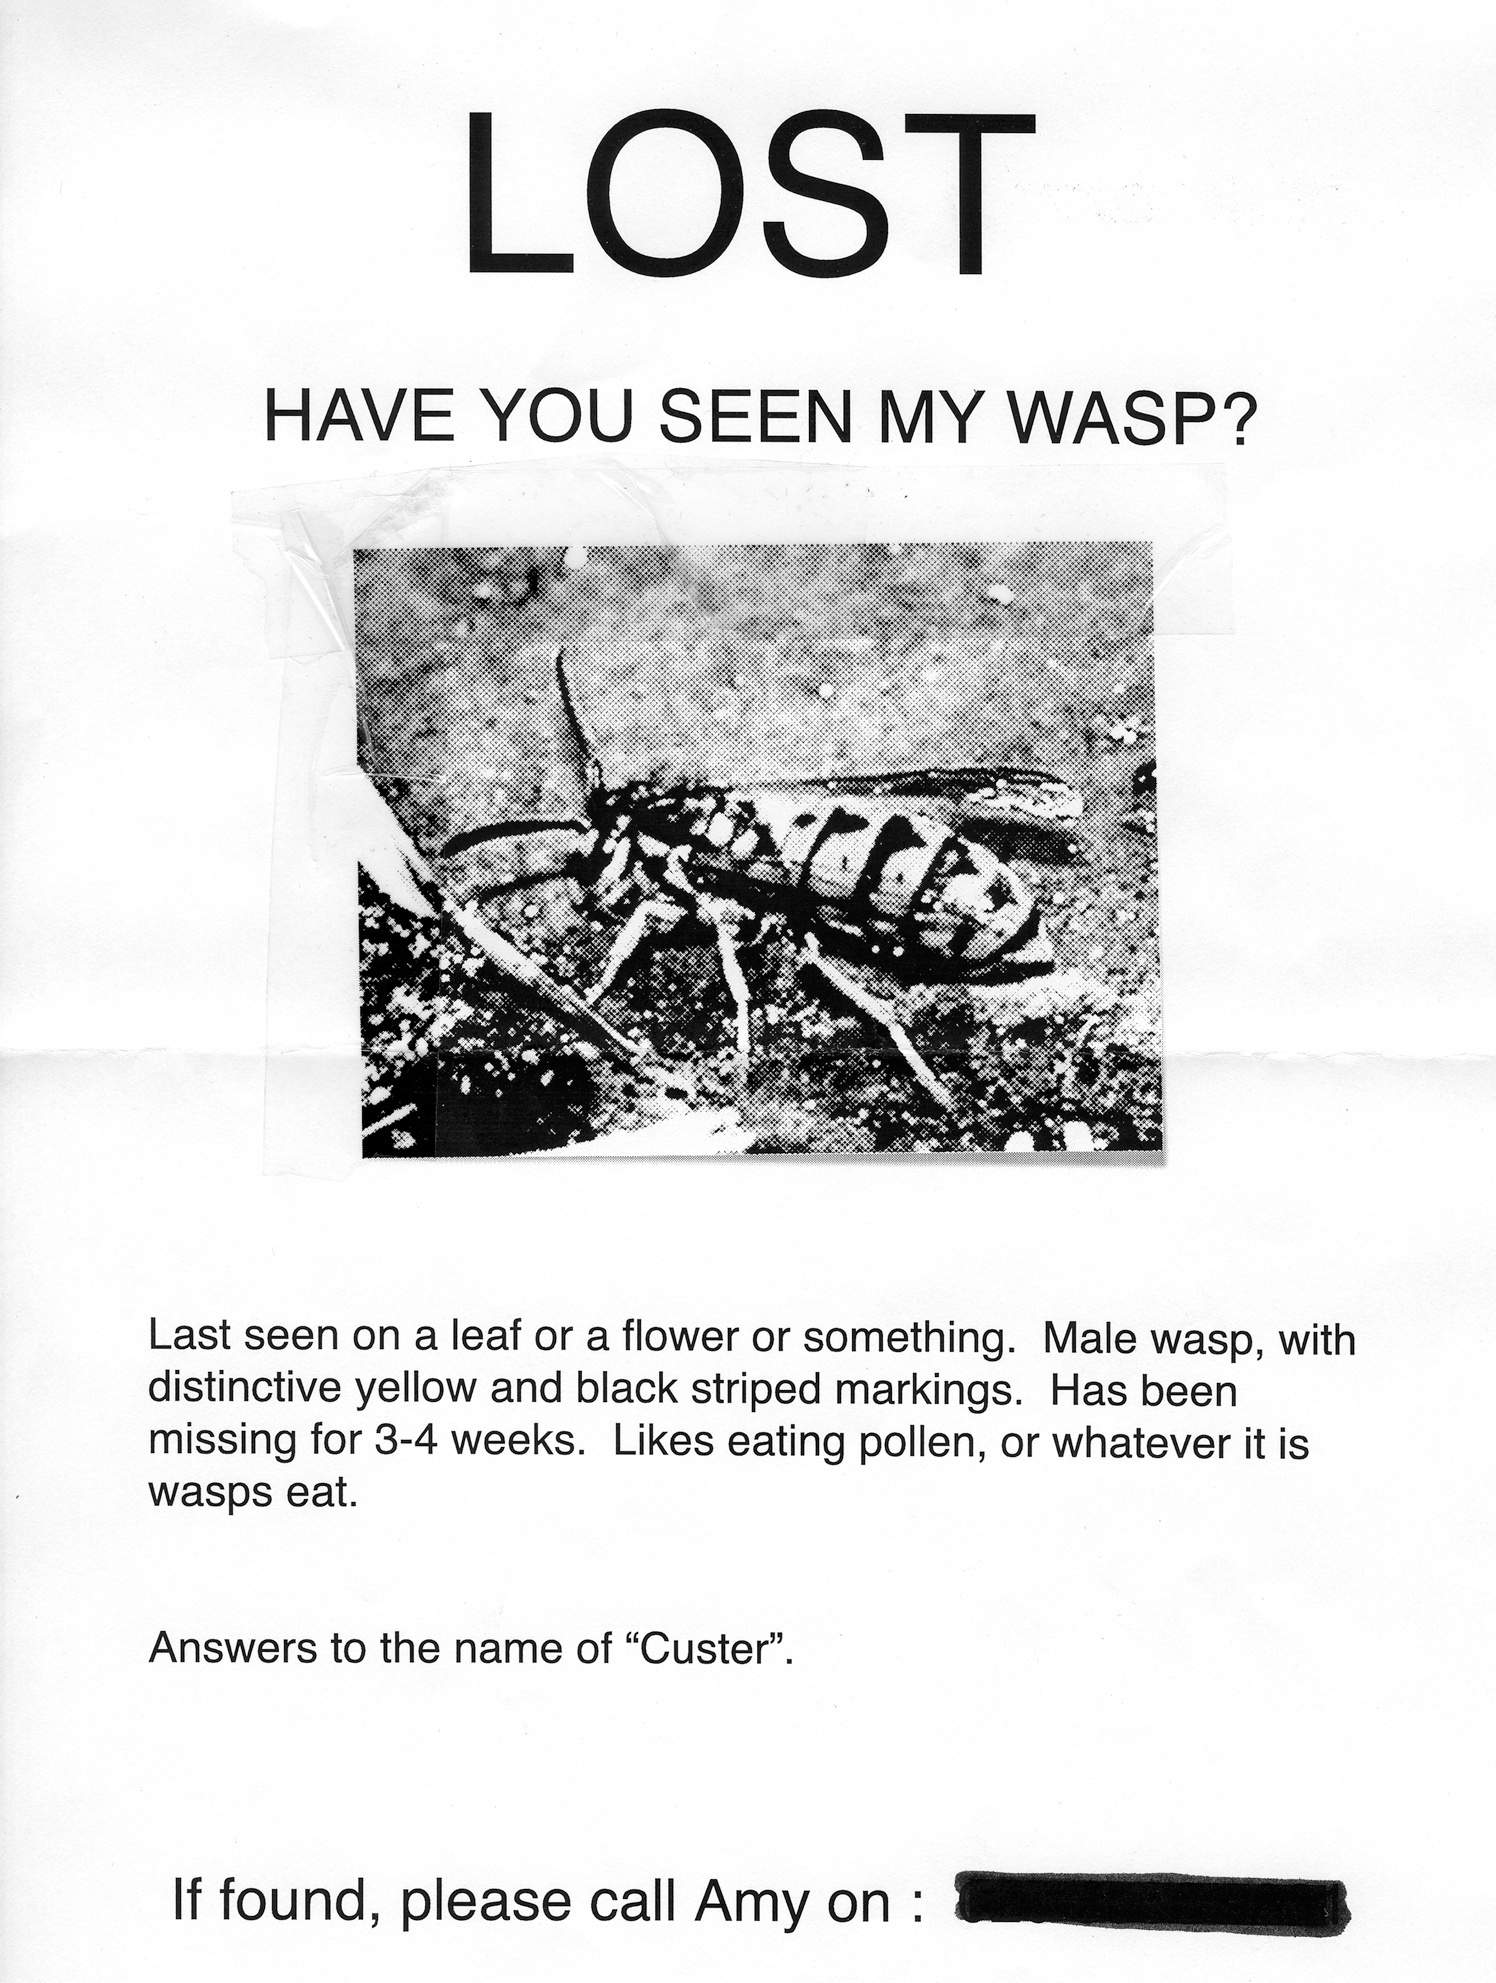 Lost. Have You Seen My Wasp?